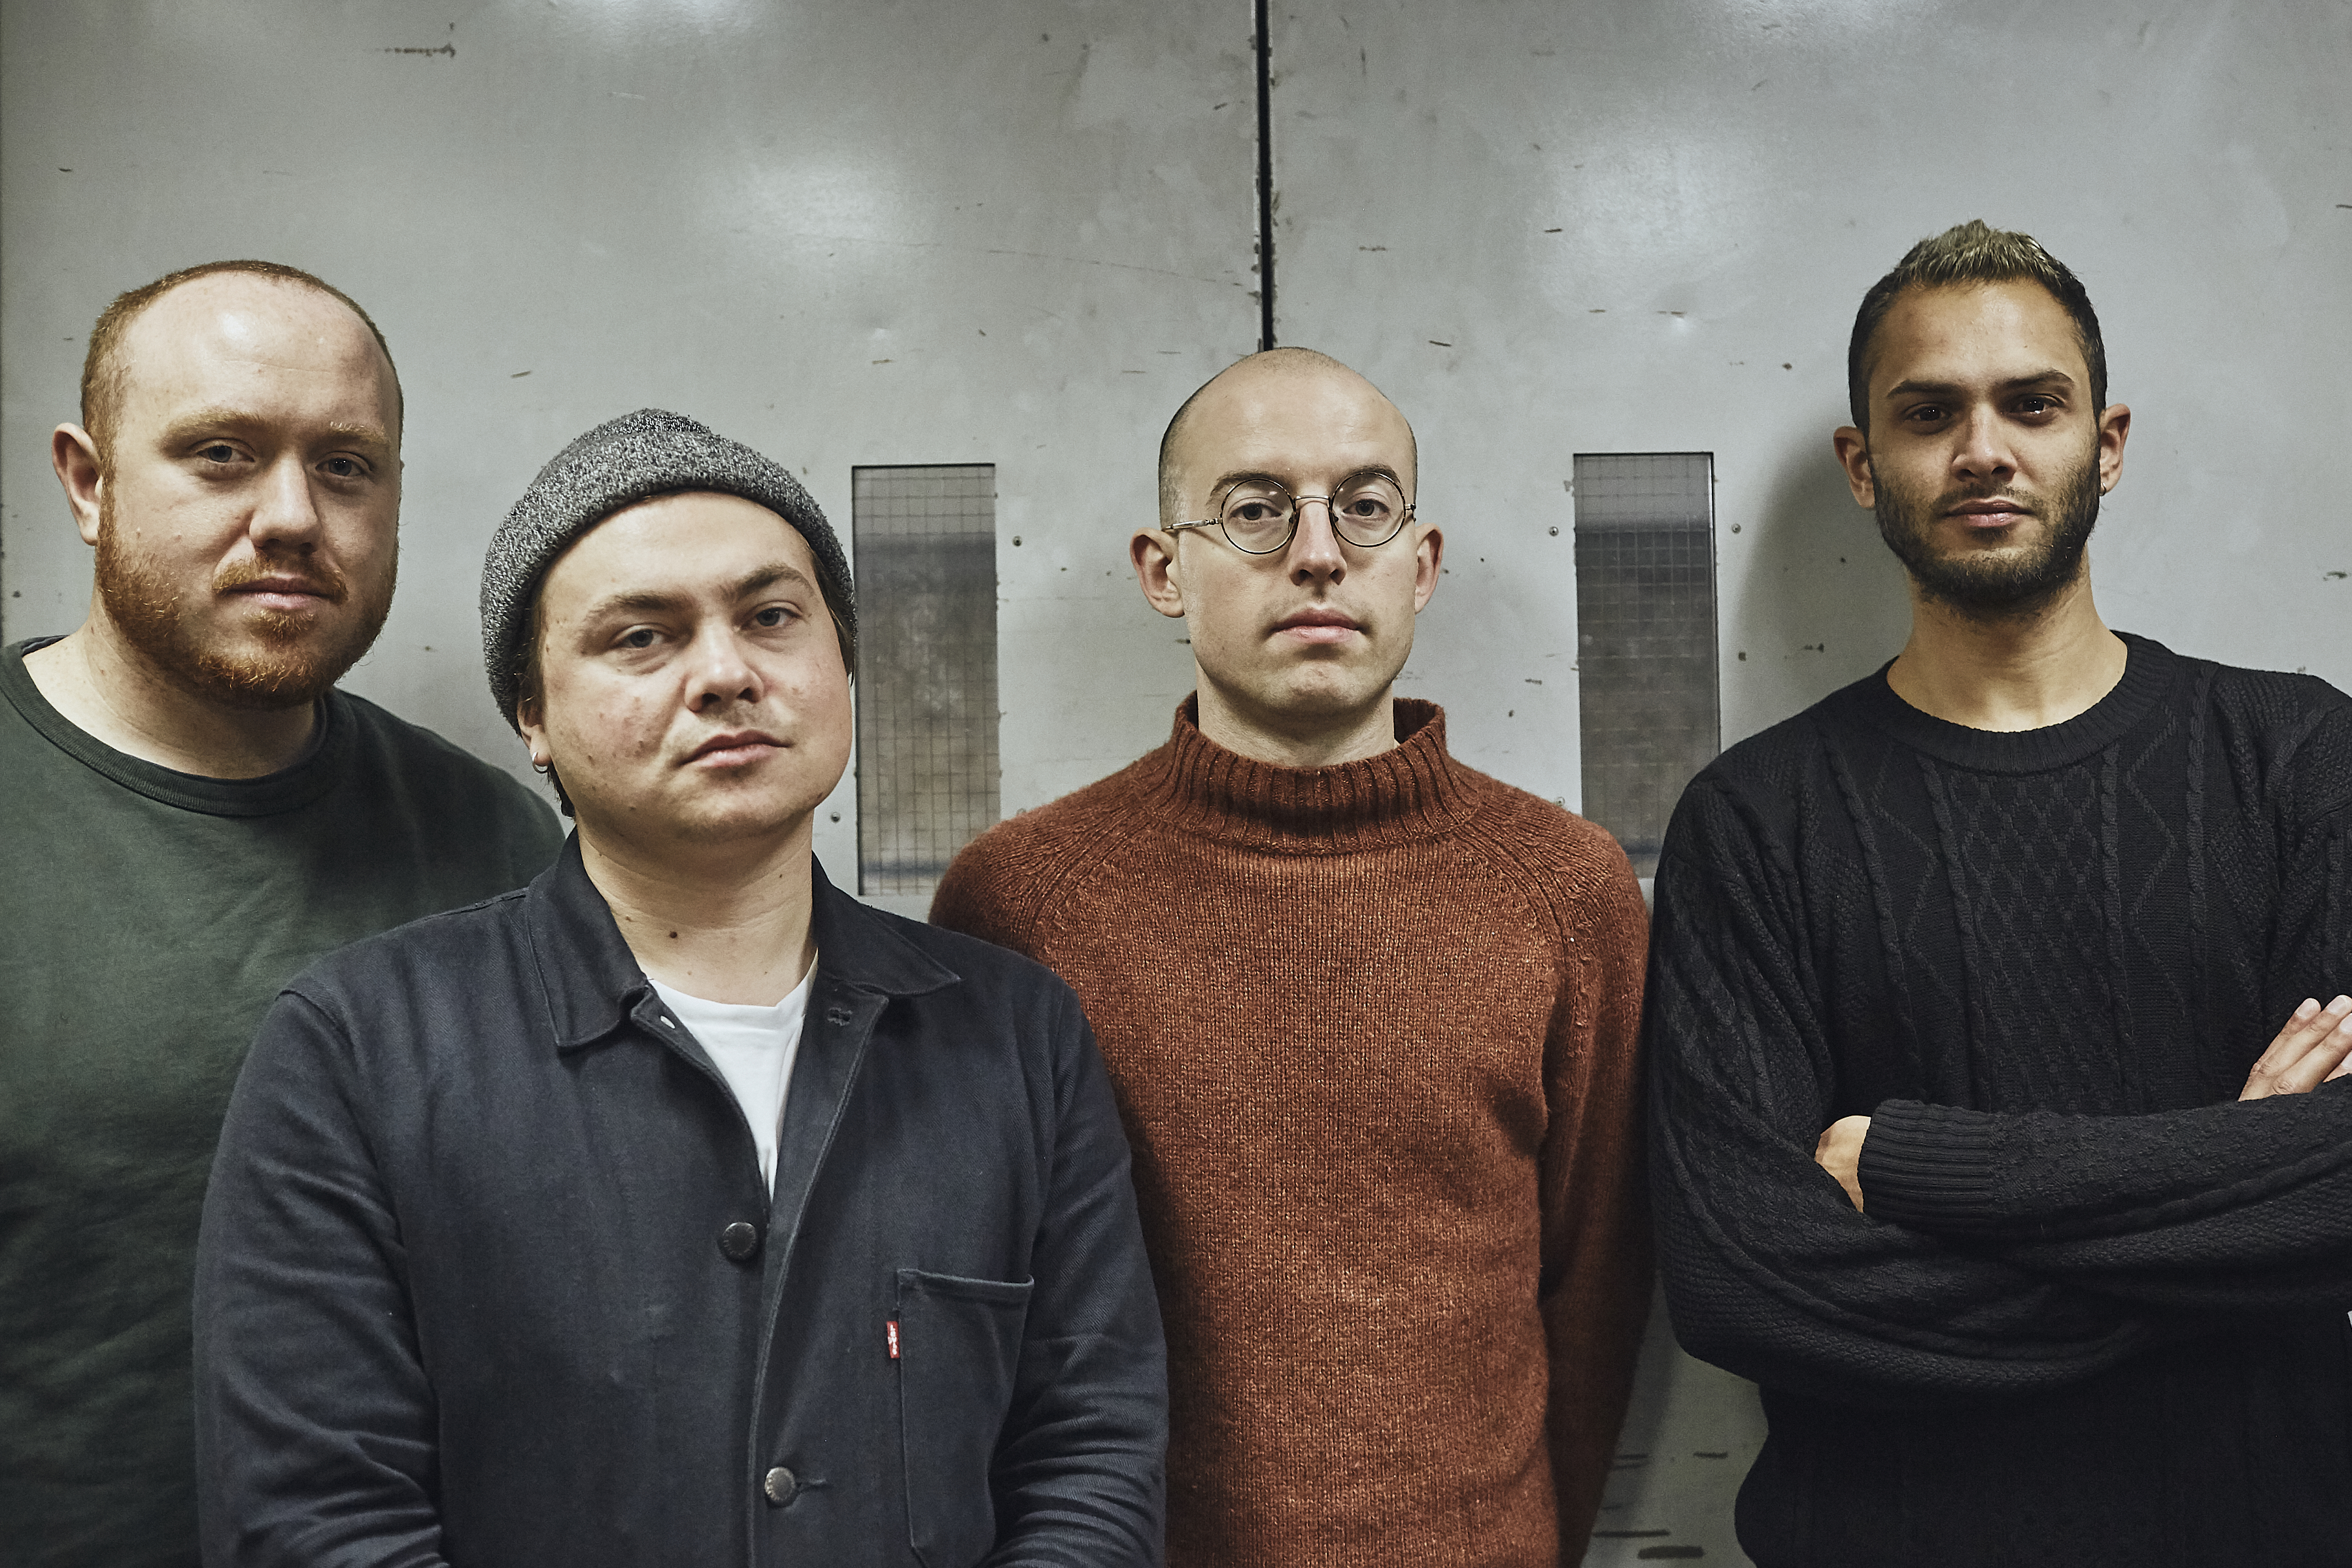 Bombay Bicycle Club are next to join The Record Club to discuss My Big Day